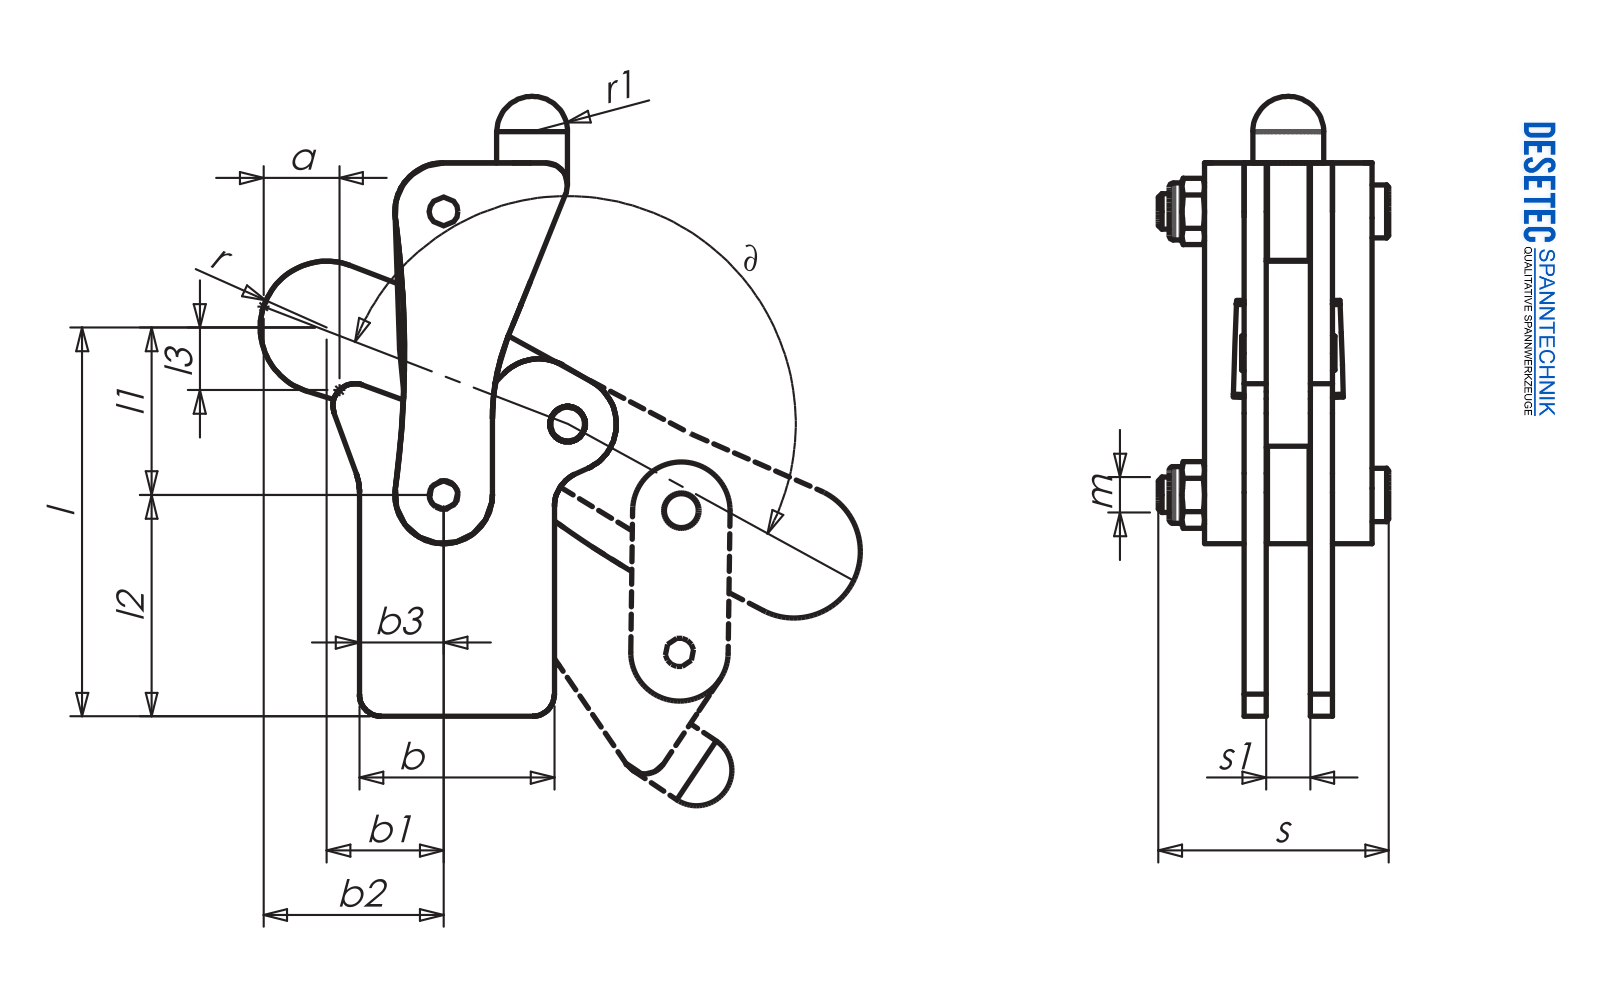 M32 Technical drawing Datasheet Modular clamp with vertical foot